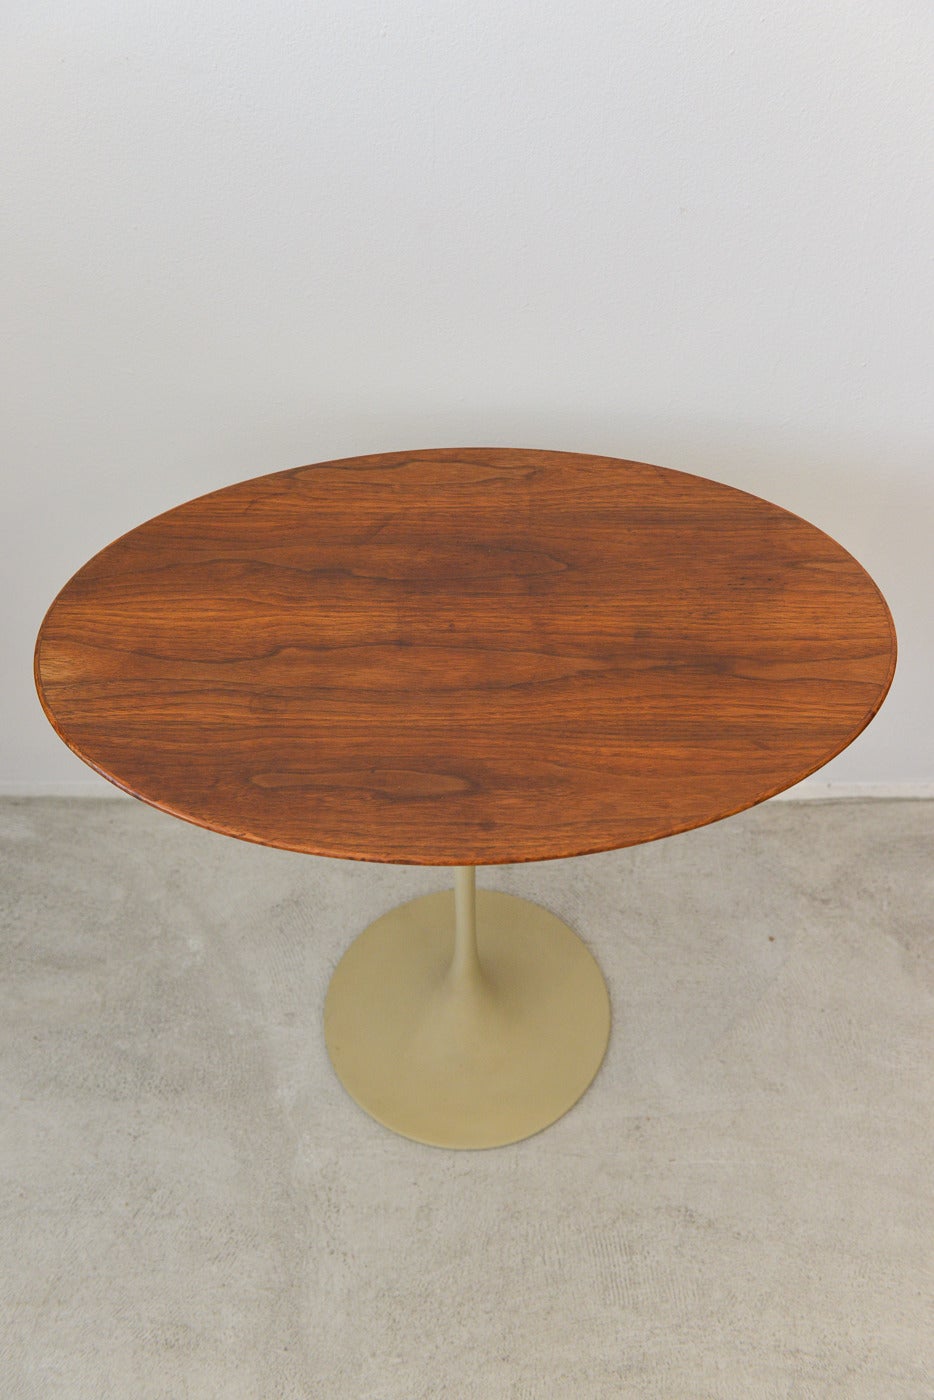 A very early and pristine oval walnut tulip side table with tulip base designed by Eero Saarinen for Knoll. Original top, base has wonderful patina and still retains the very early Knoll ‘bowtie’ label on underside.

A classic and iconic piece of